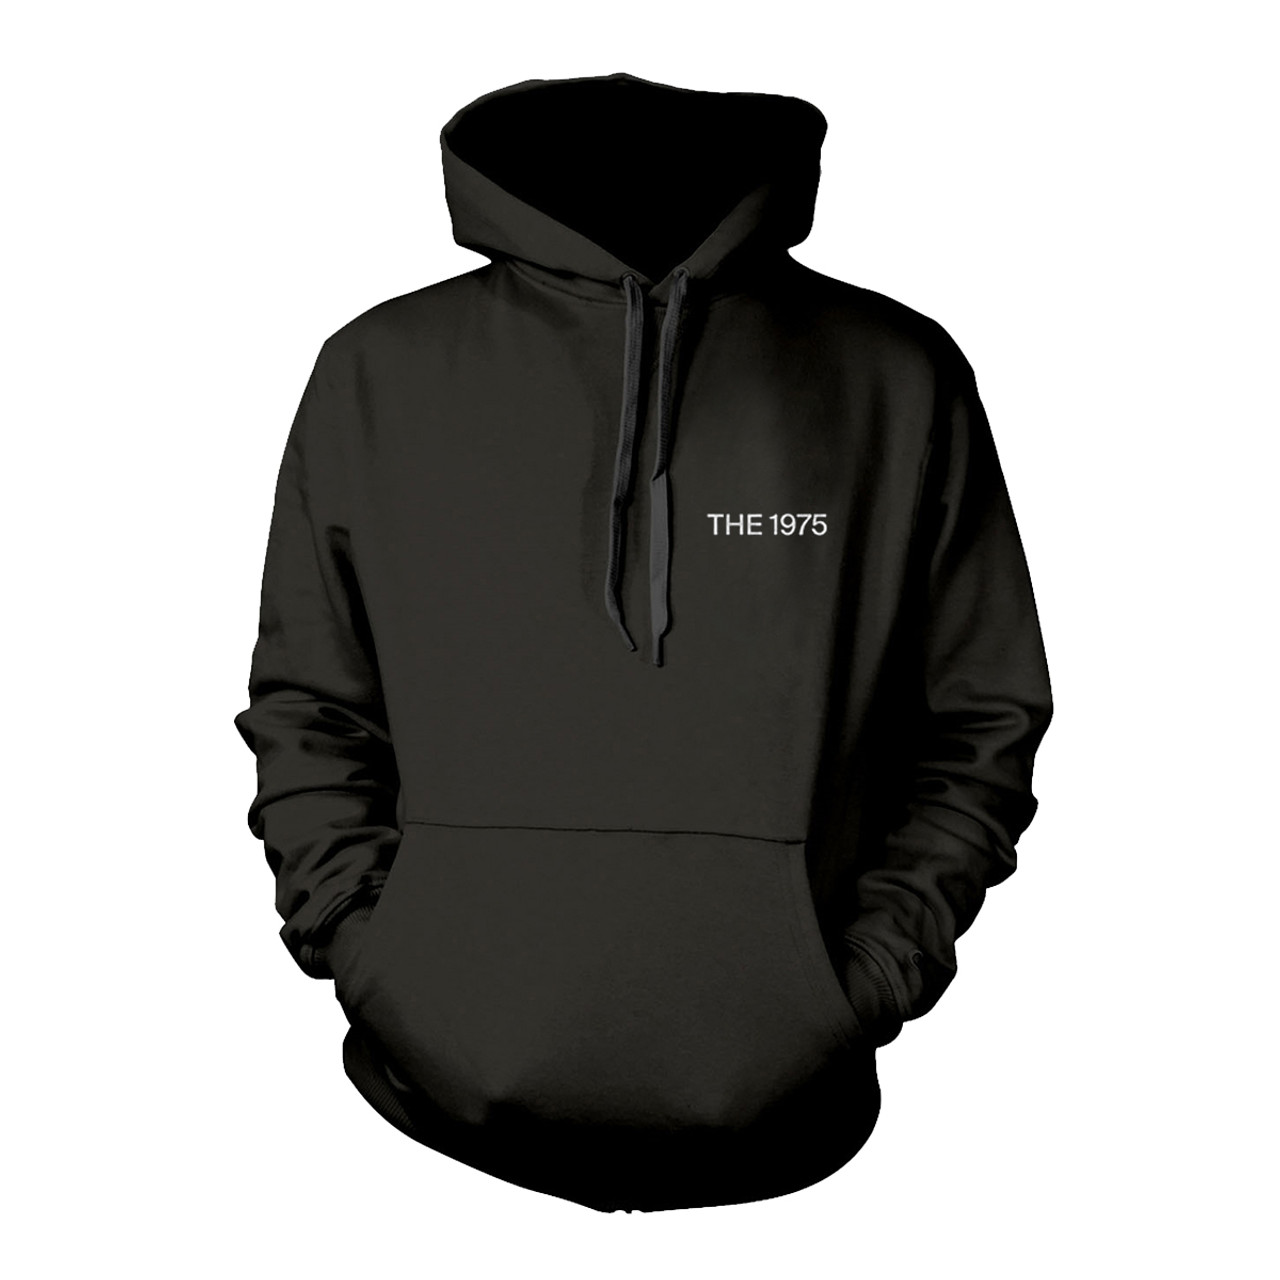 The 1975 'ABIIOR Welcome Welcome Version 2' (Black) Pull Over Hoodie